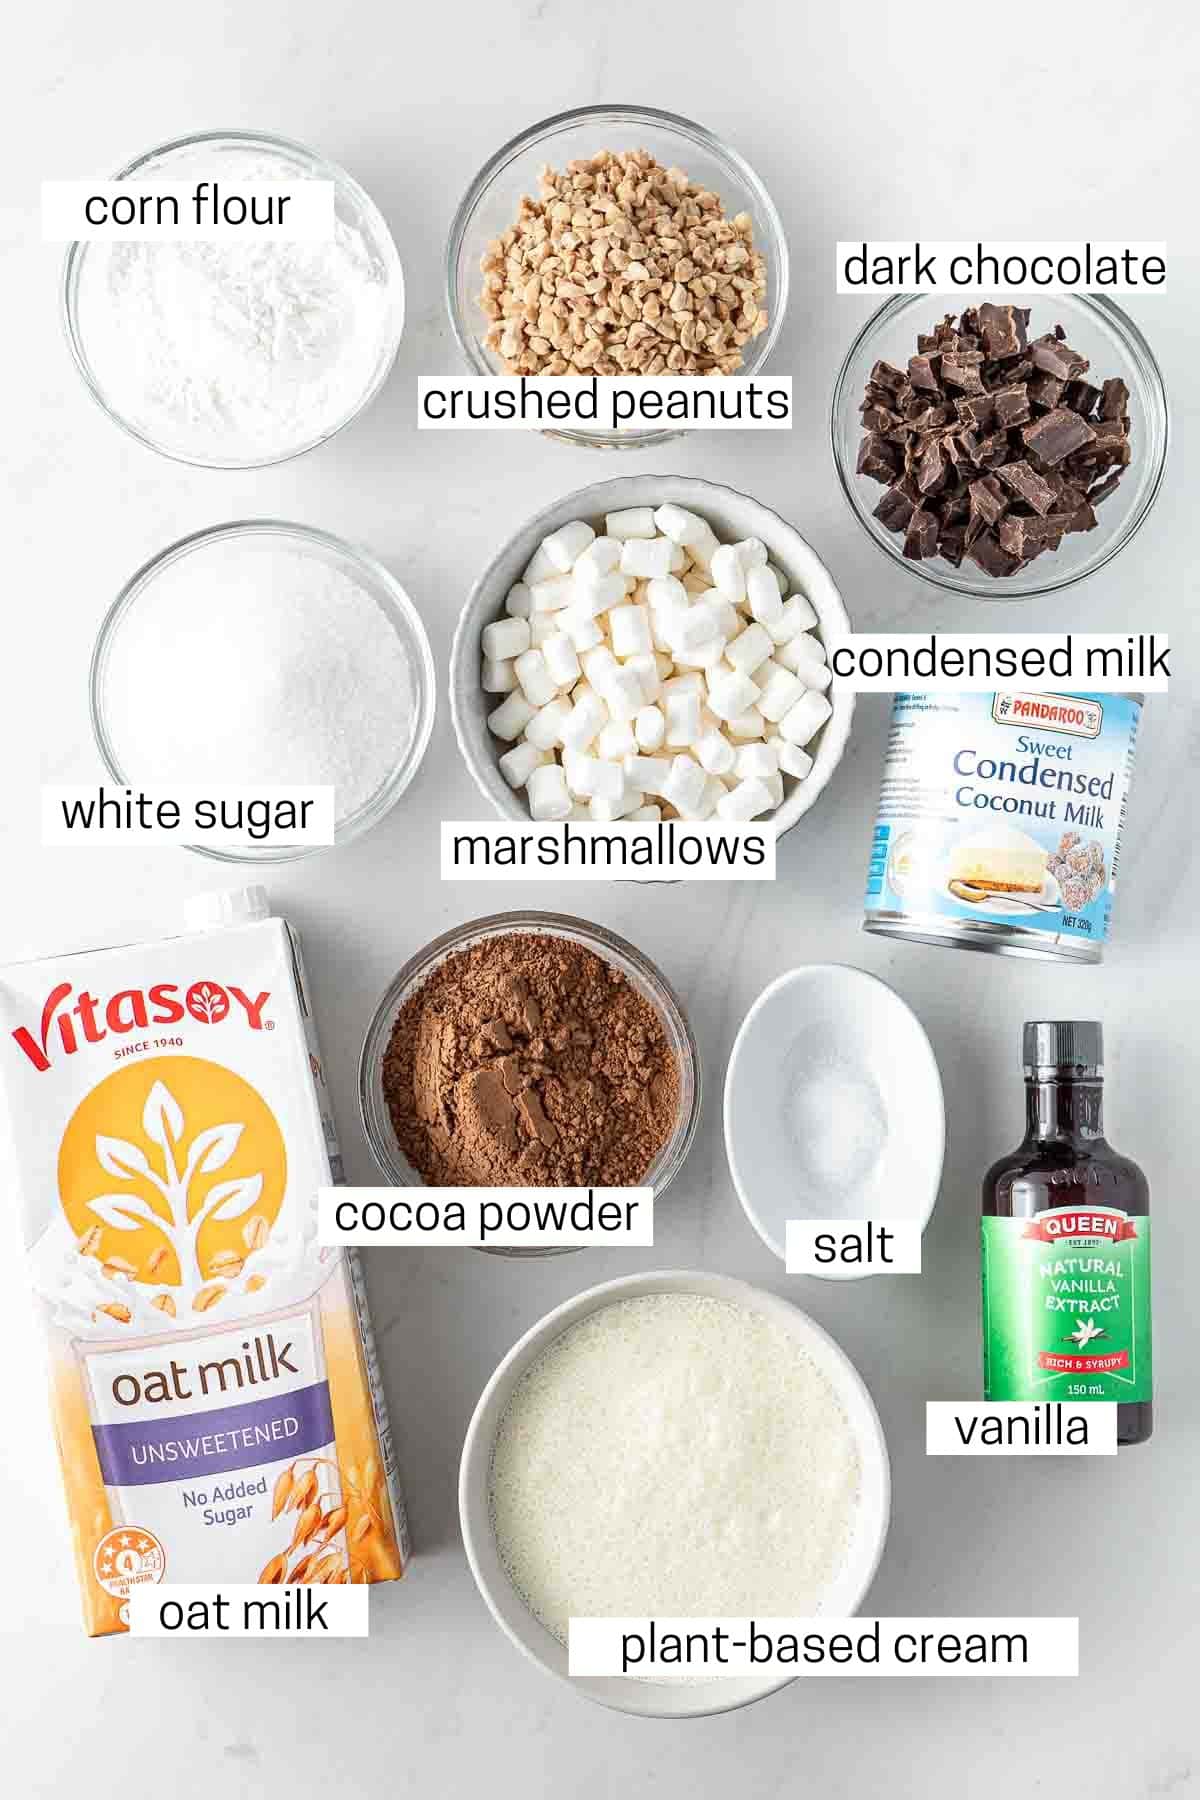 All ingredients needed for dairy free rocky road ice cream laid out in small bowls.